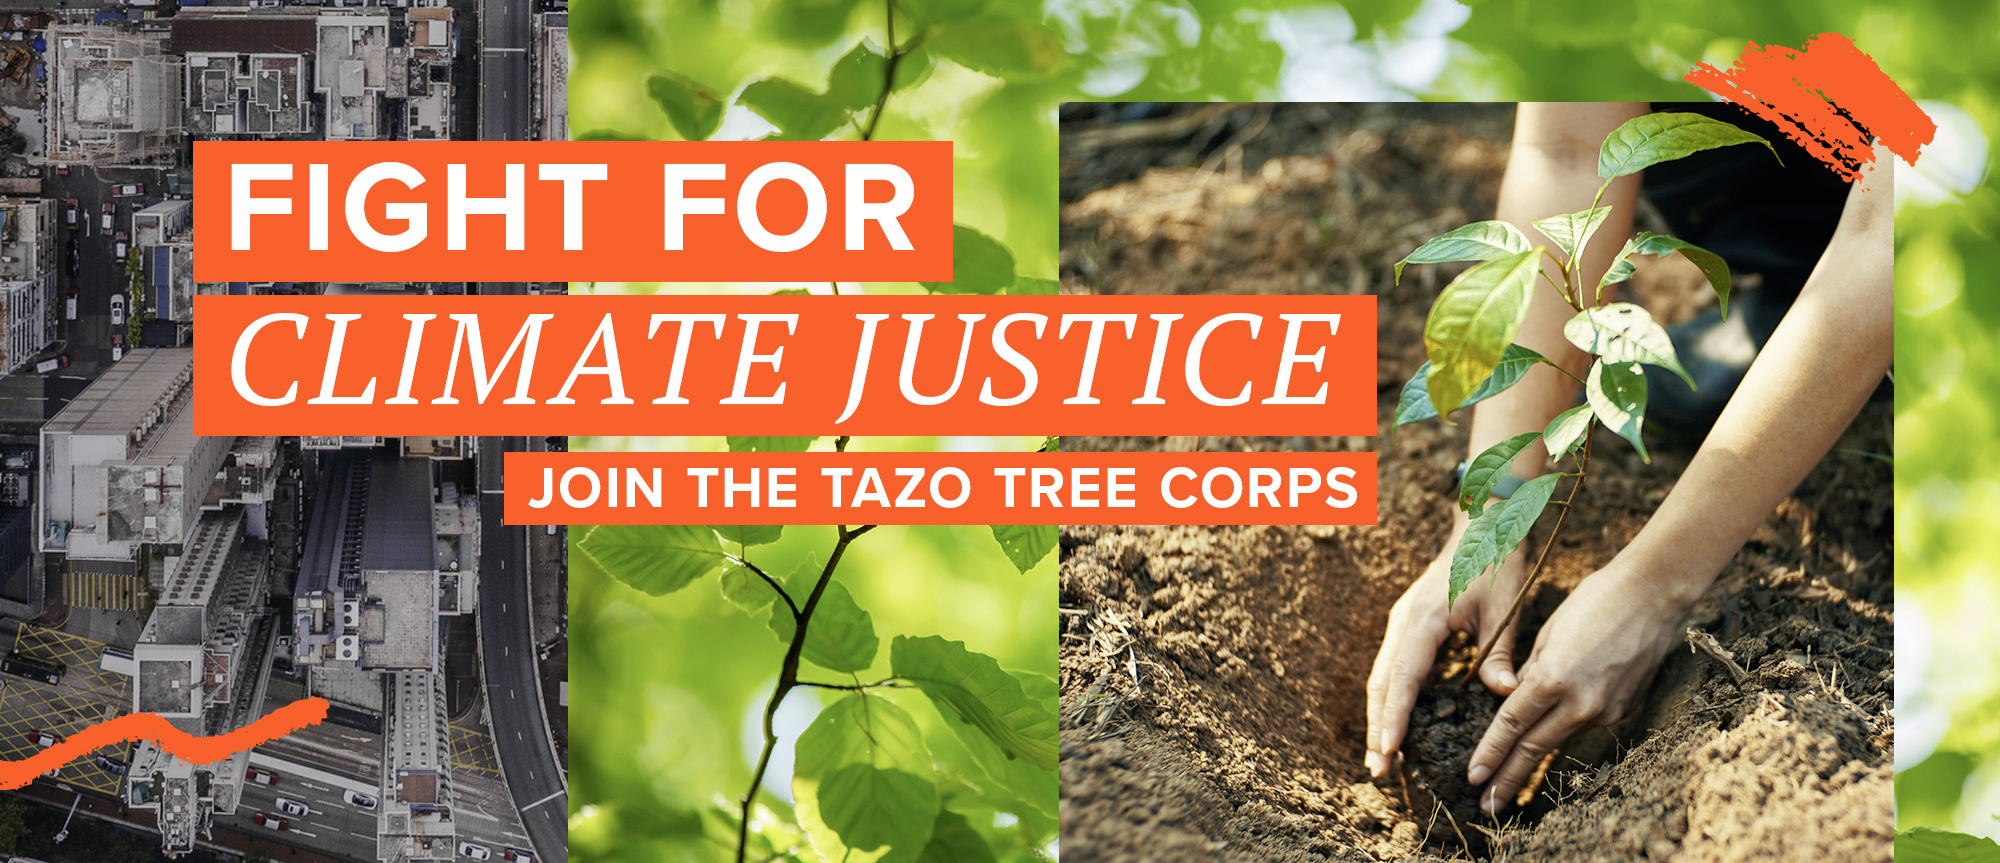 Fight for climate justice - Join the TAZO Tree Corps